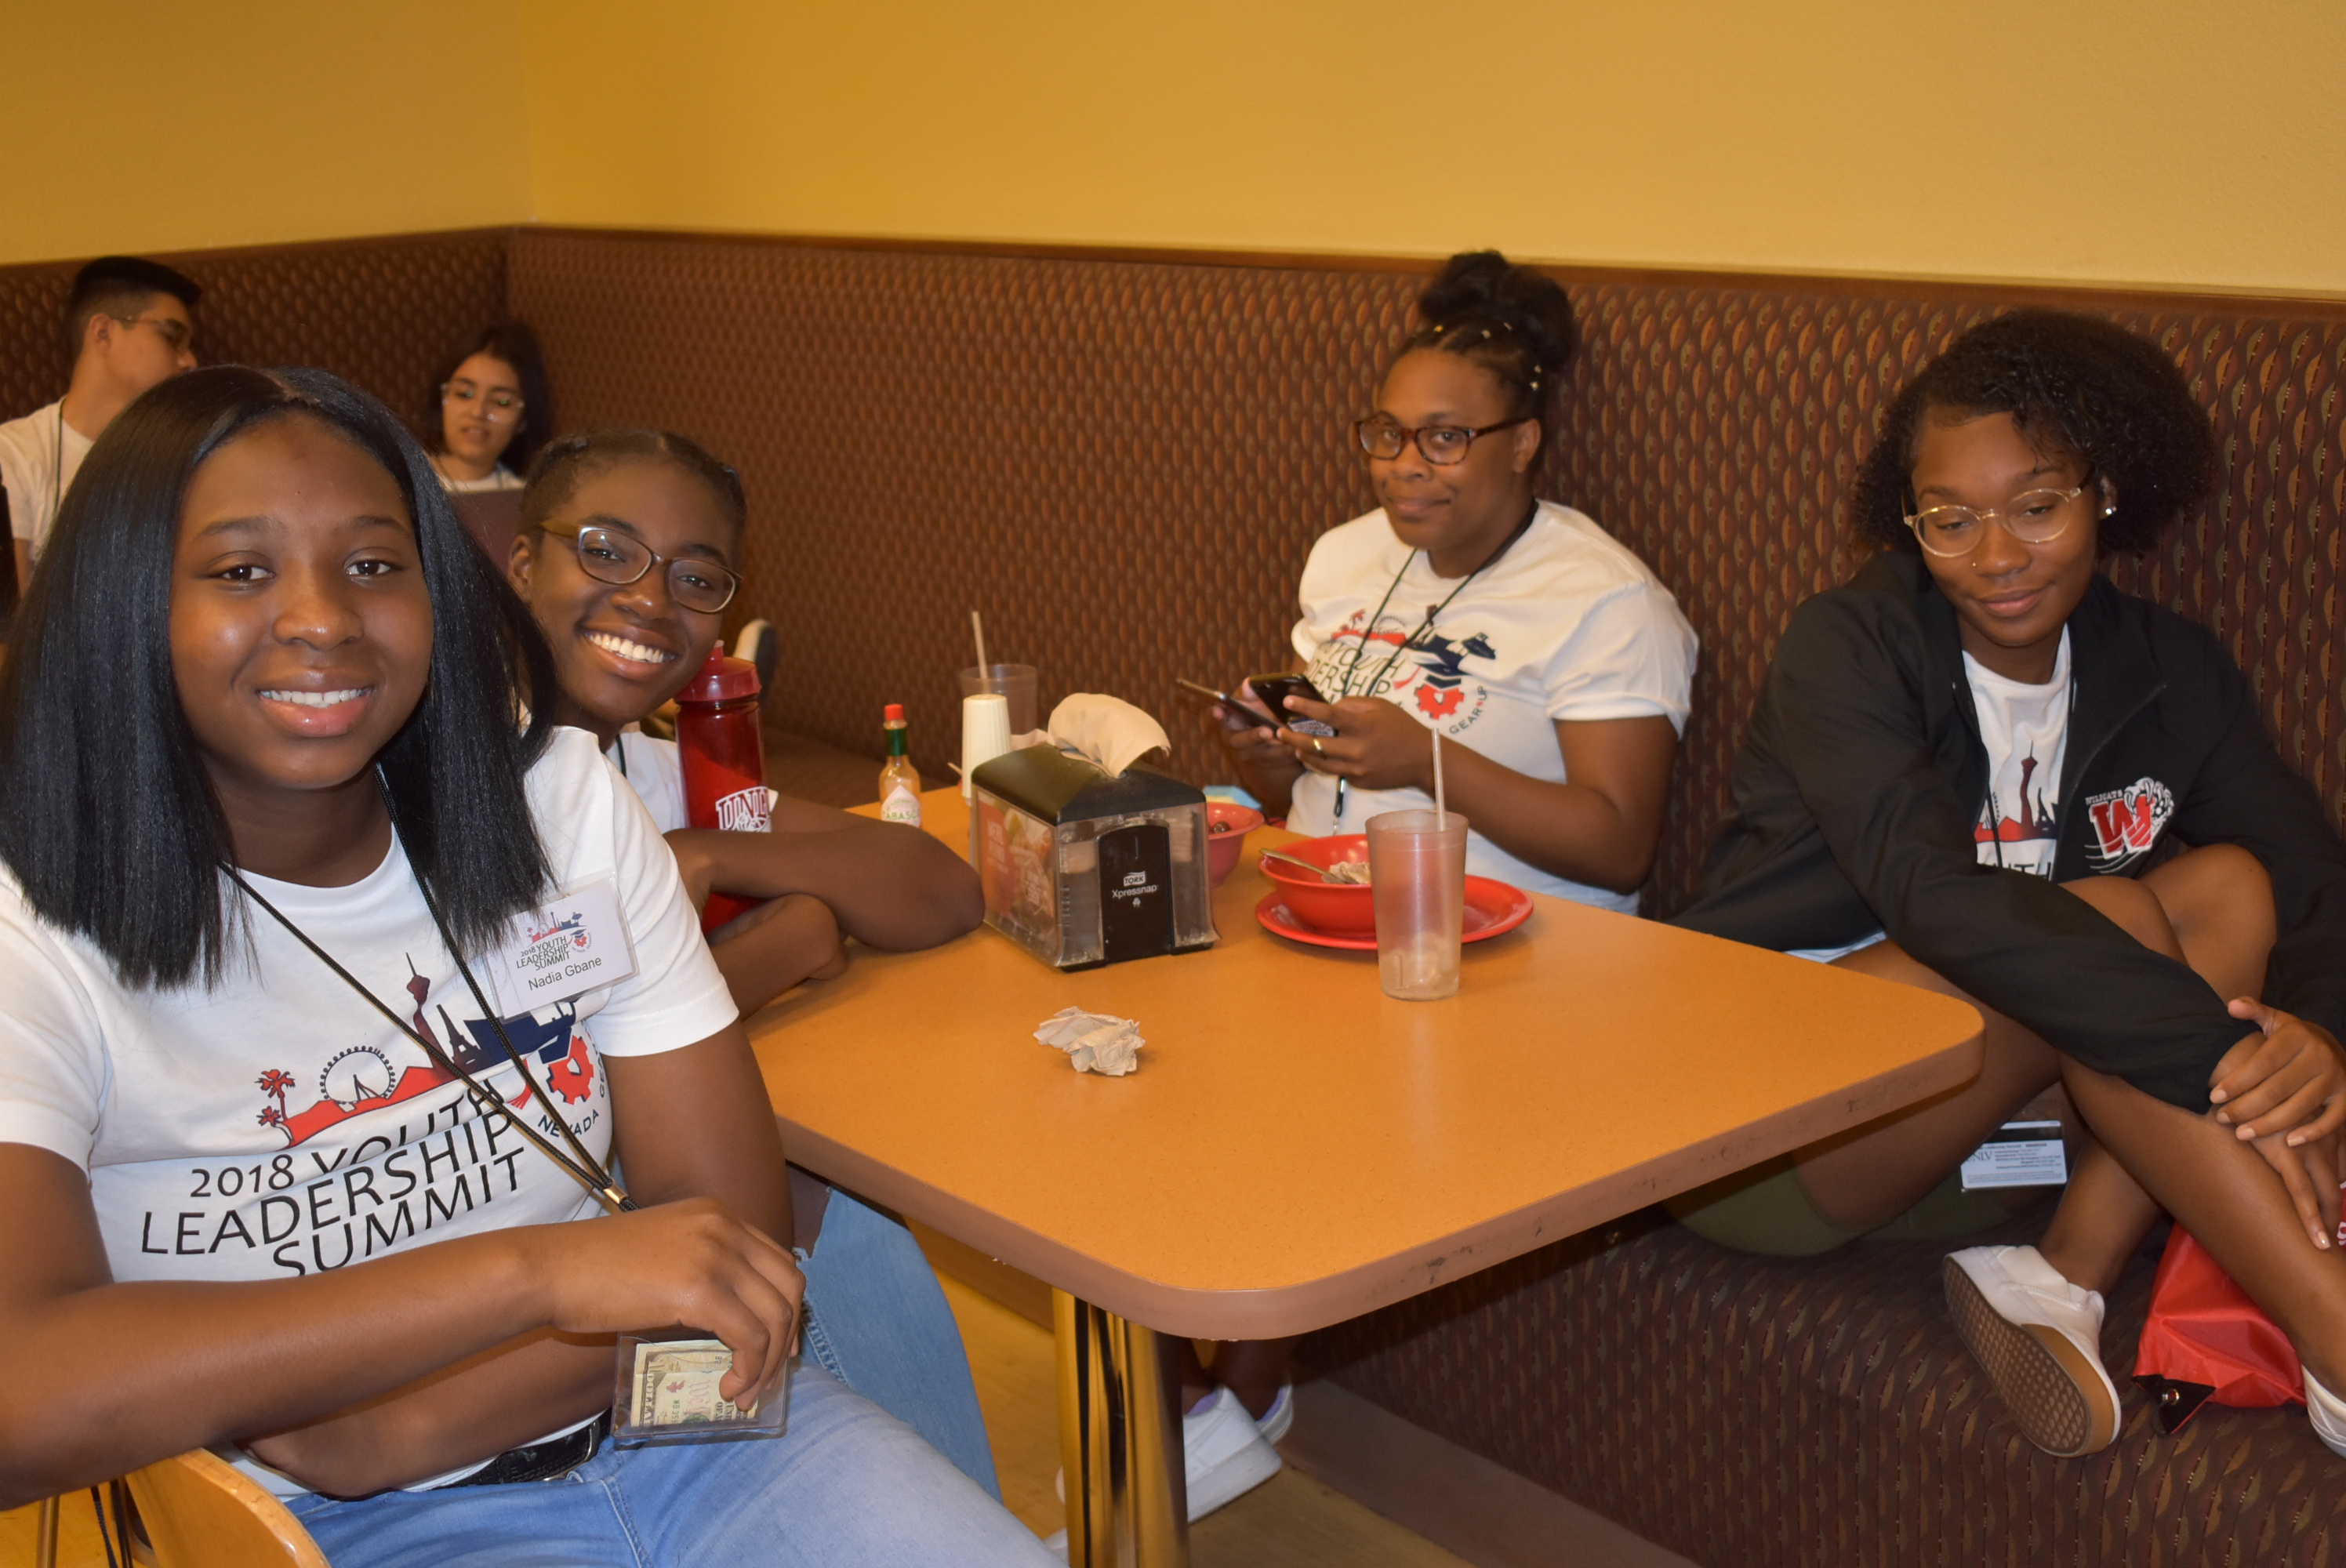 A group of four young women in matching “Youth Leadership Summit” t-shirts sit at a cafeteria table and look up to smile for the camera